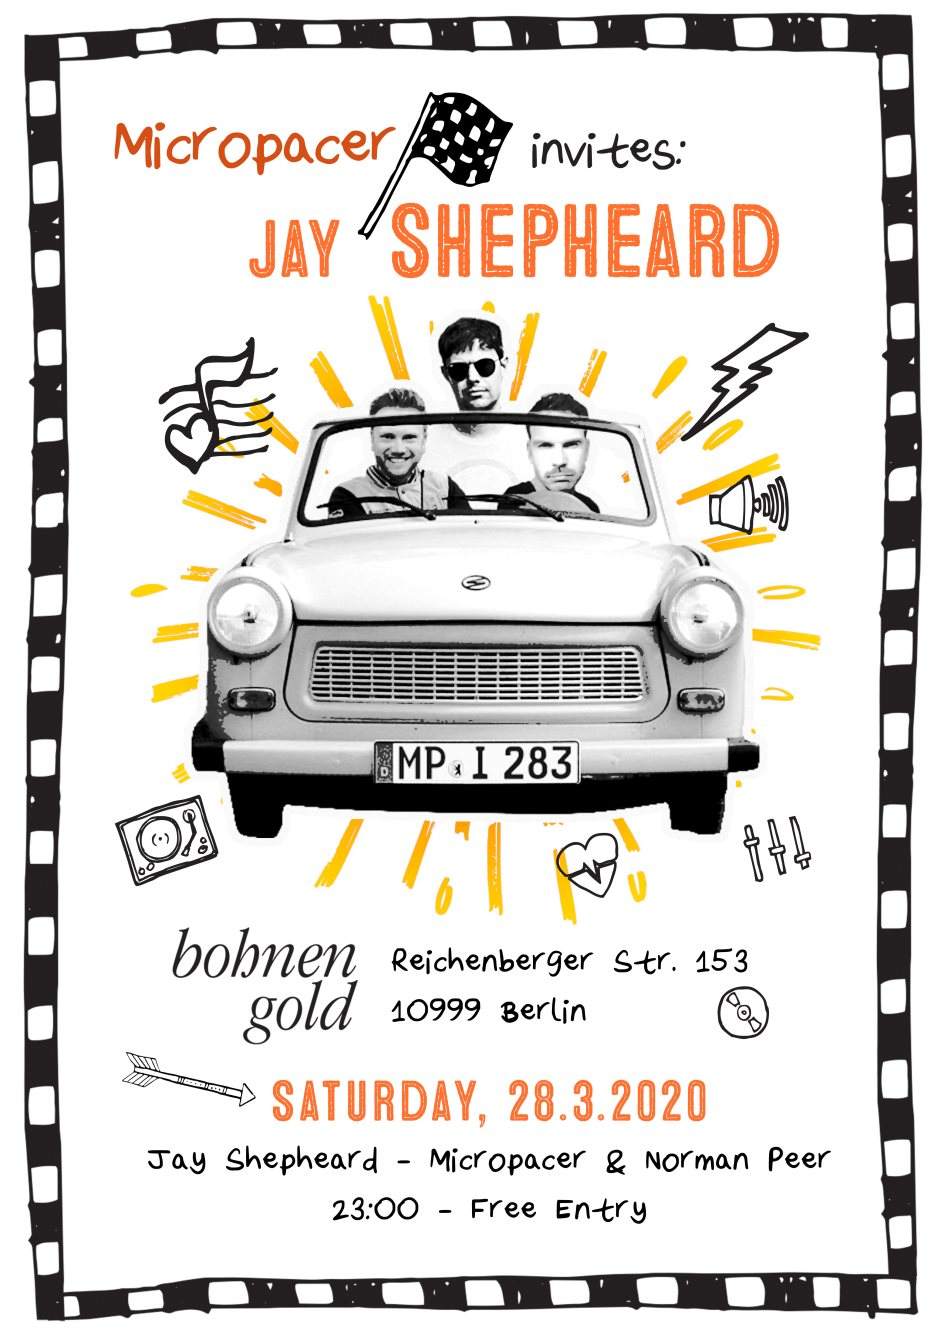 [Cancelled / Postponed] Micropacer Invites... #1 with Jay Shepheard - フライヤー表